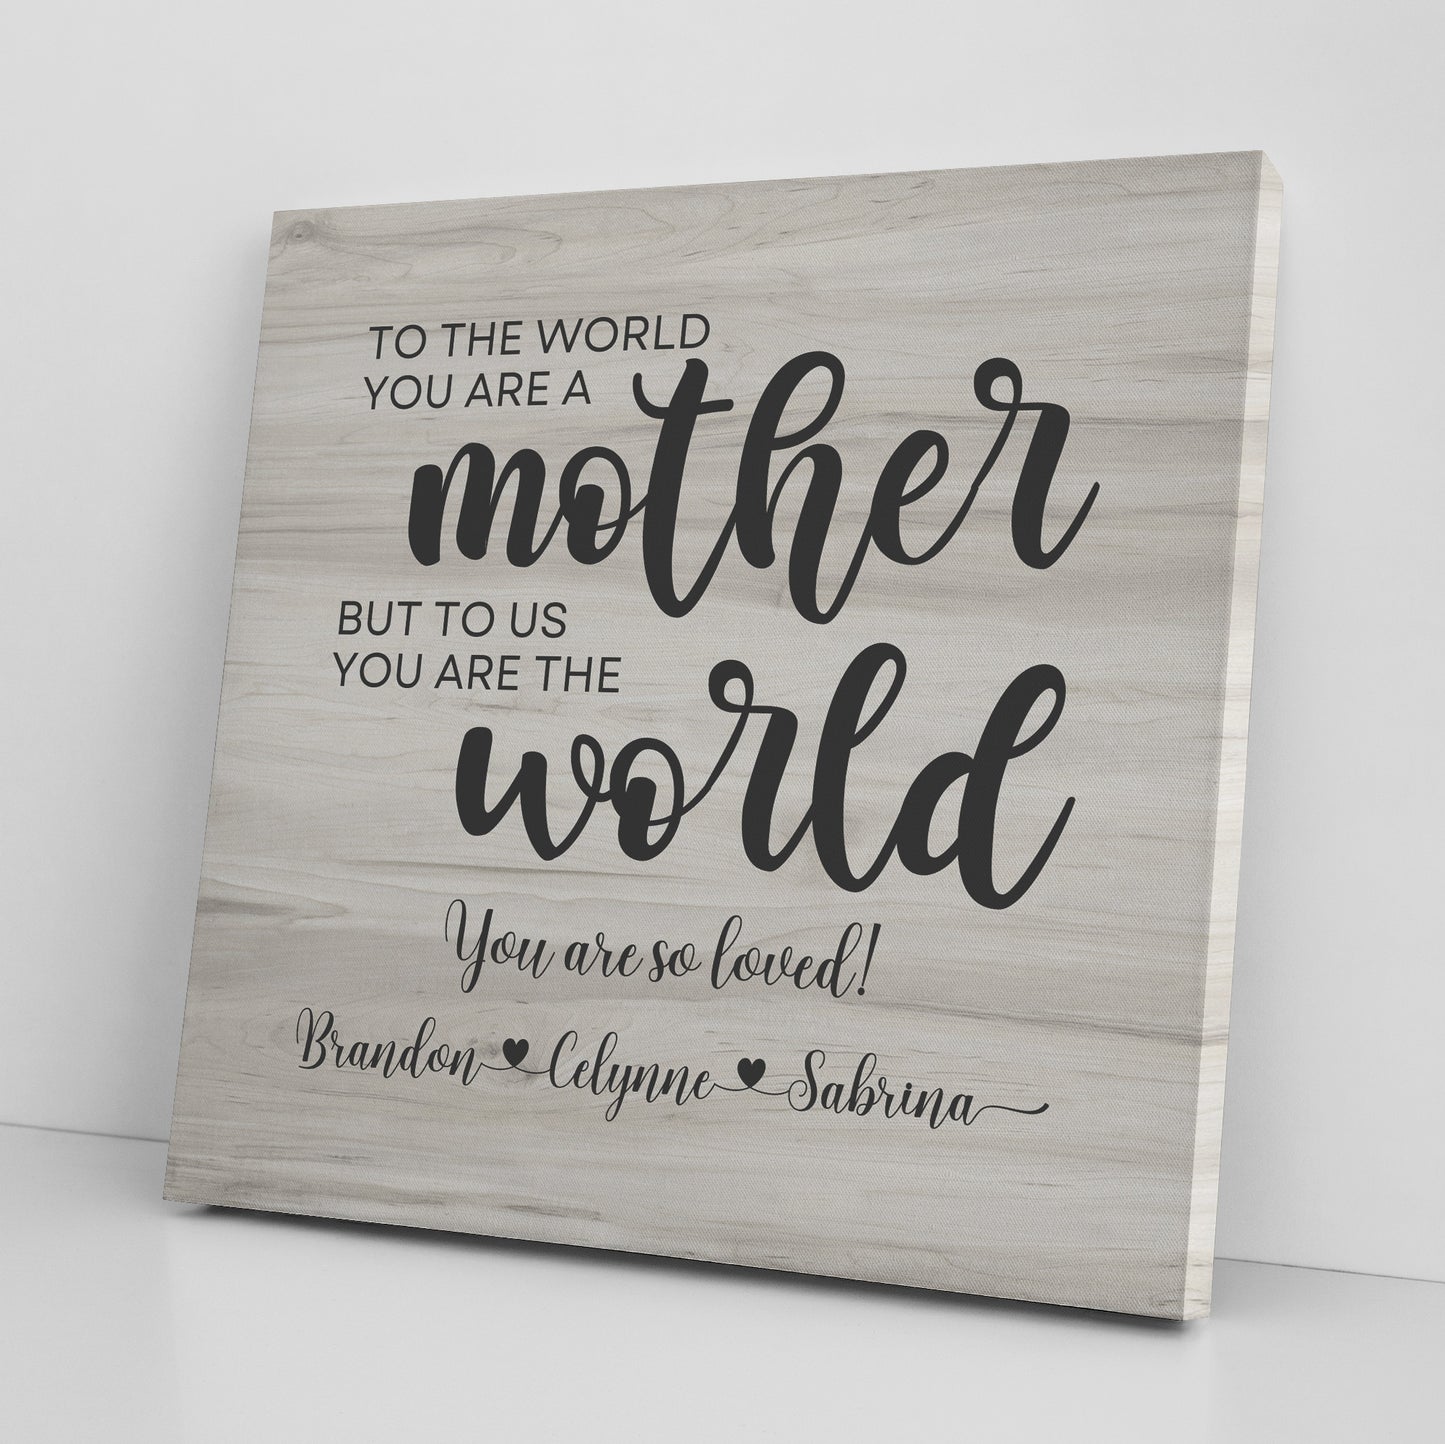 Personalized Gift for Mom "To Us You Are The World" | Custom Canvas Print with Children's Names